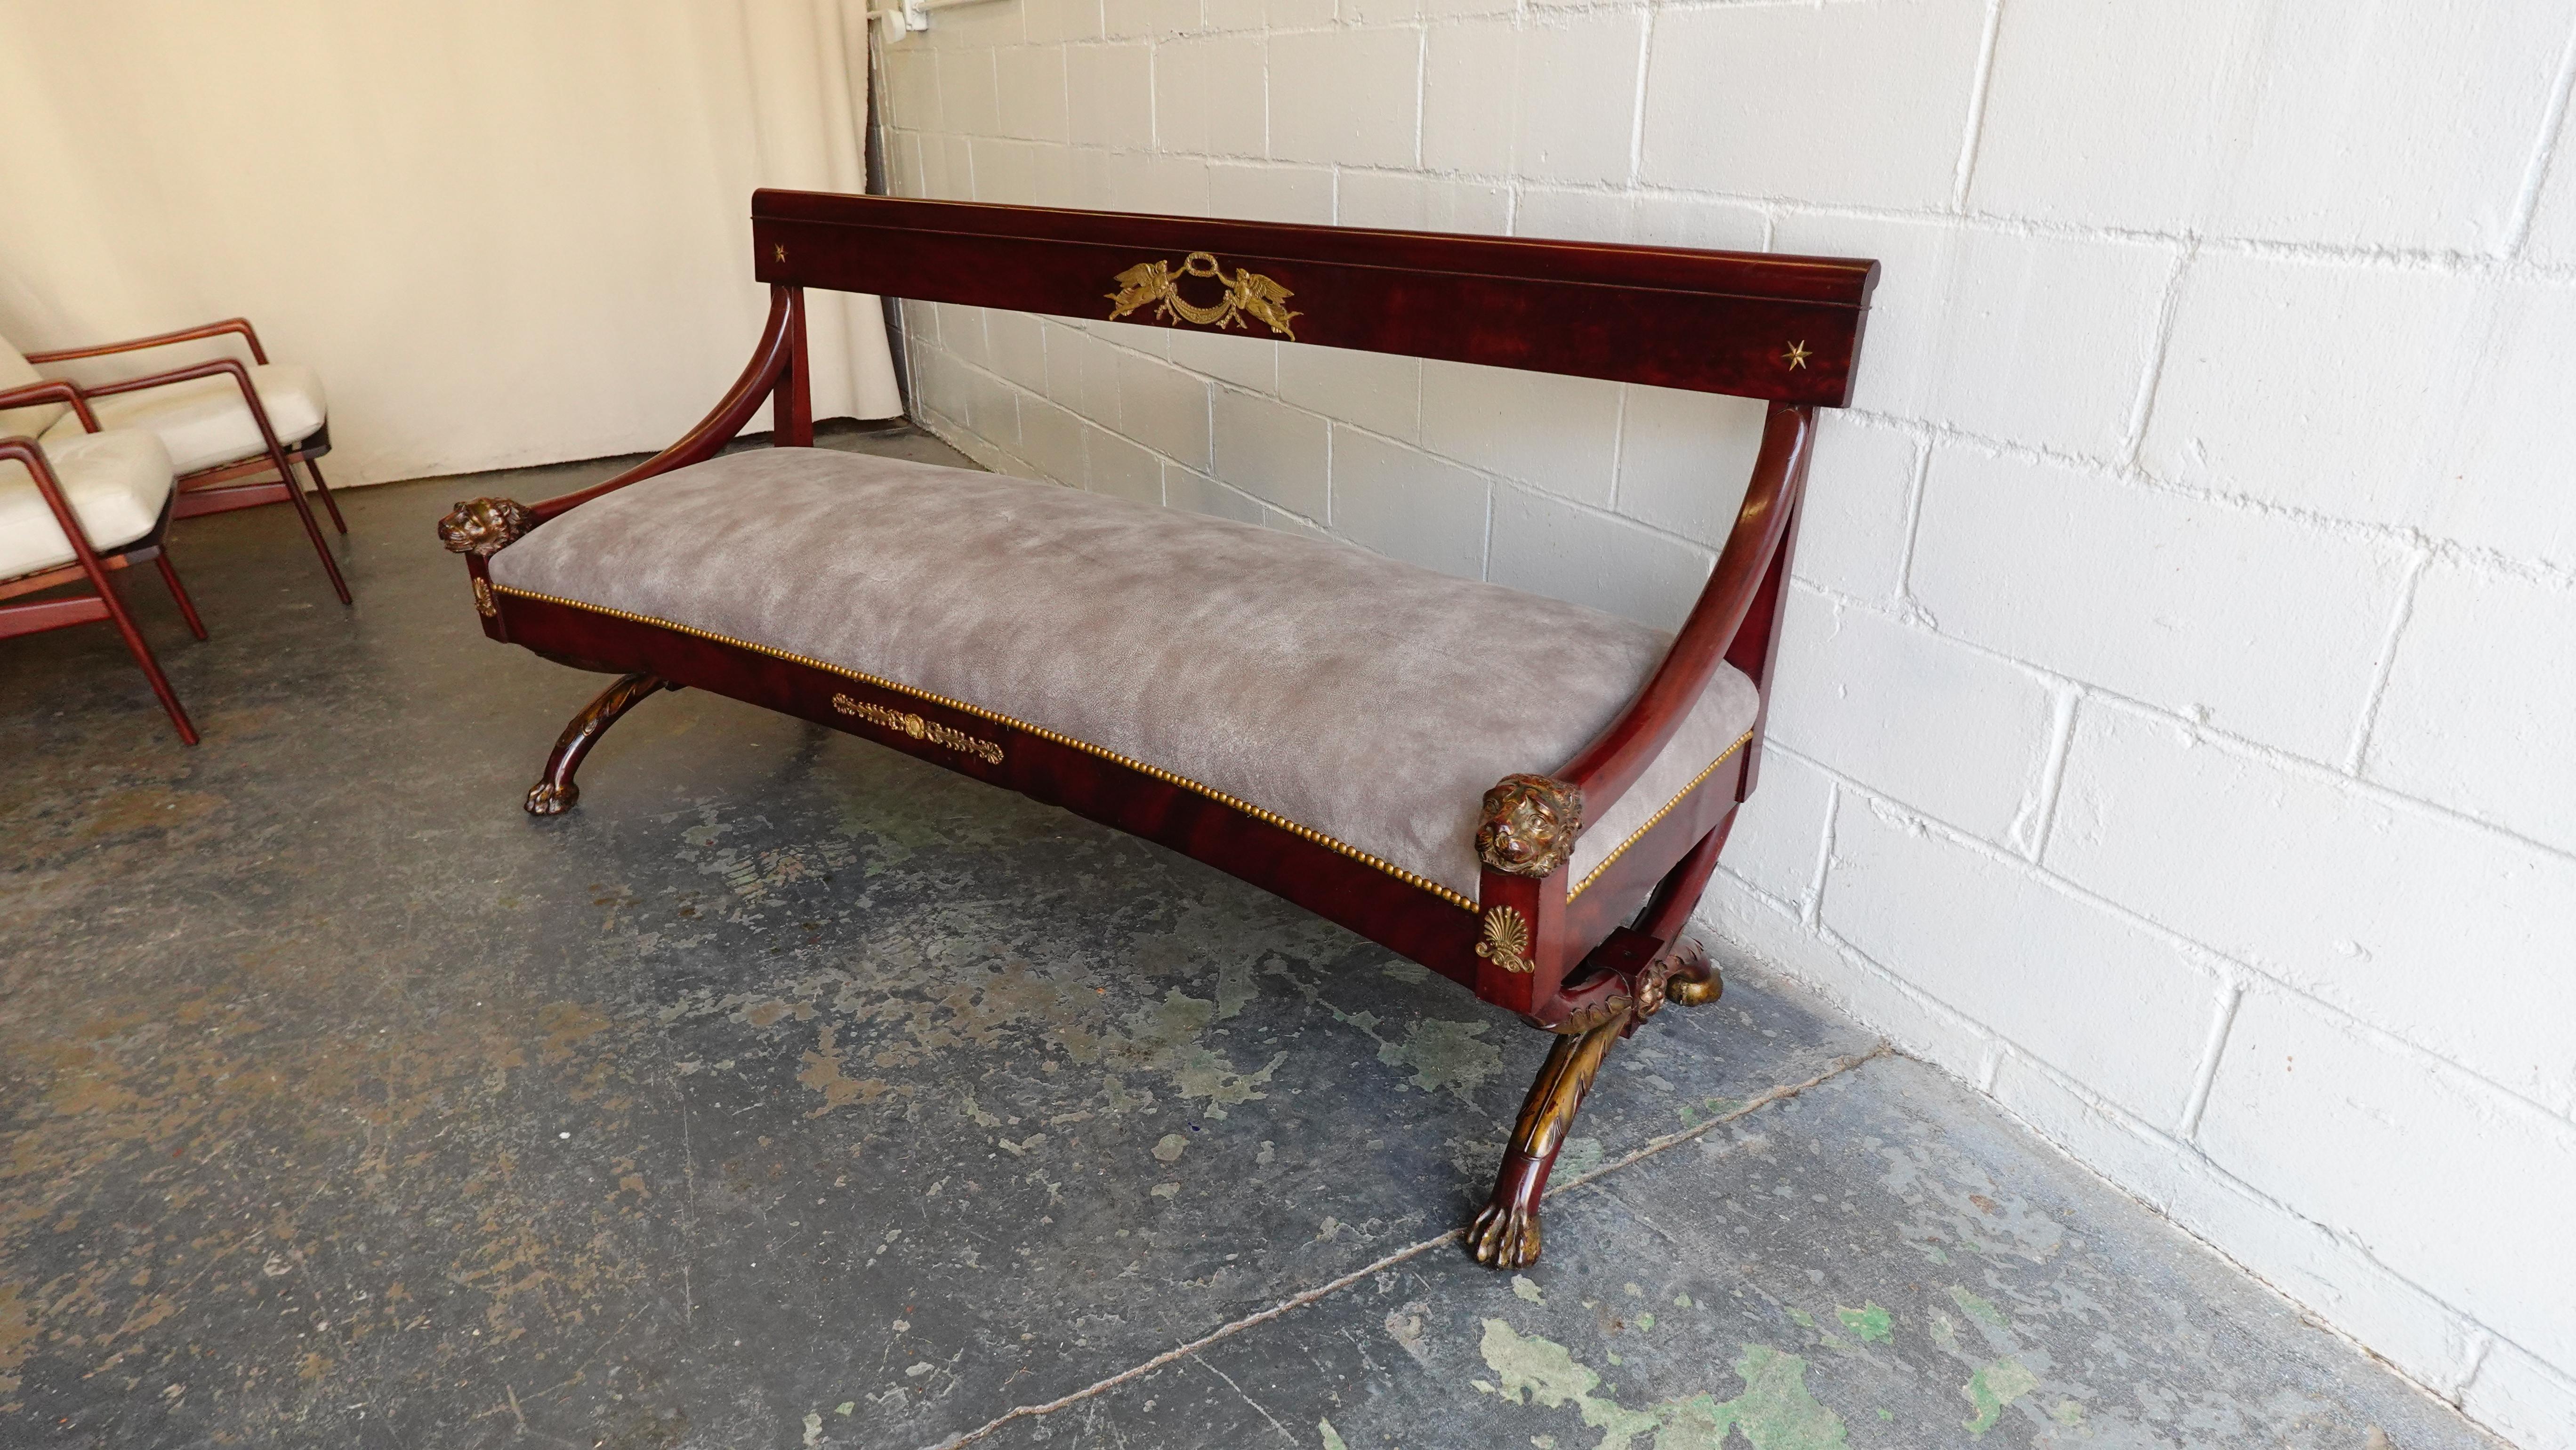 A fine and well preserved mahogany & gilt bronze canapé from the Second Empire Period under the reign of Napoleon III. Absolutely wonderful condition, seat cushion has been redone in a lovely full grain textured grey leather—traditional sprung seat